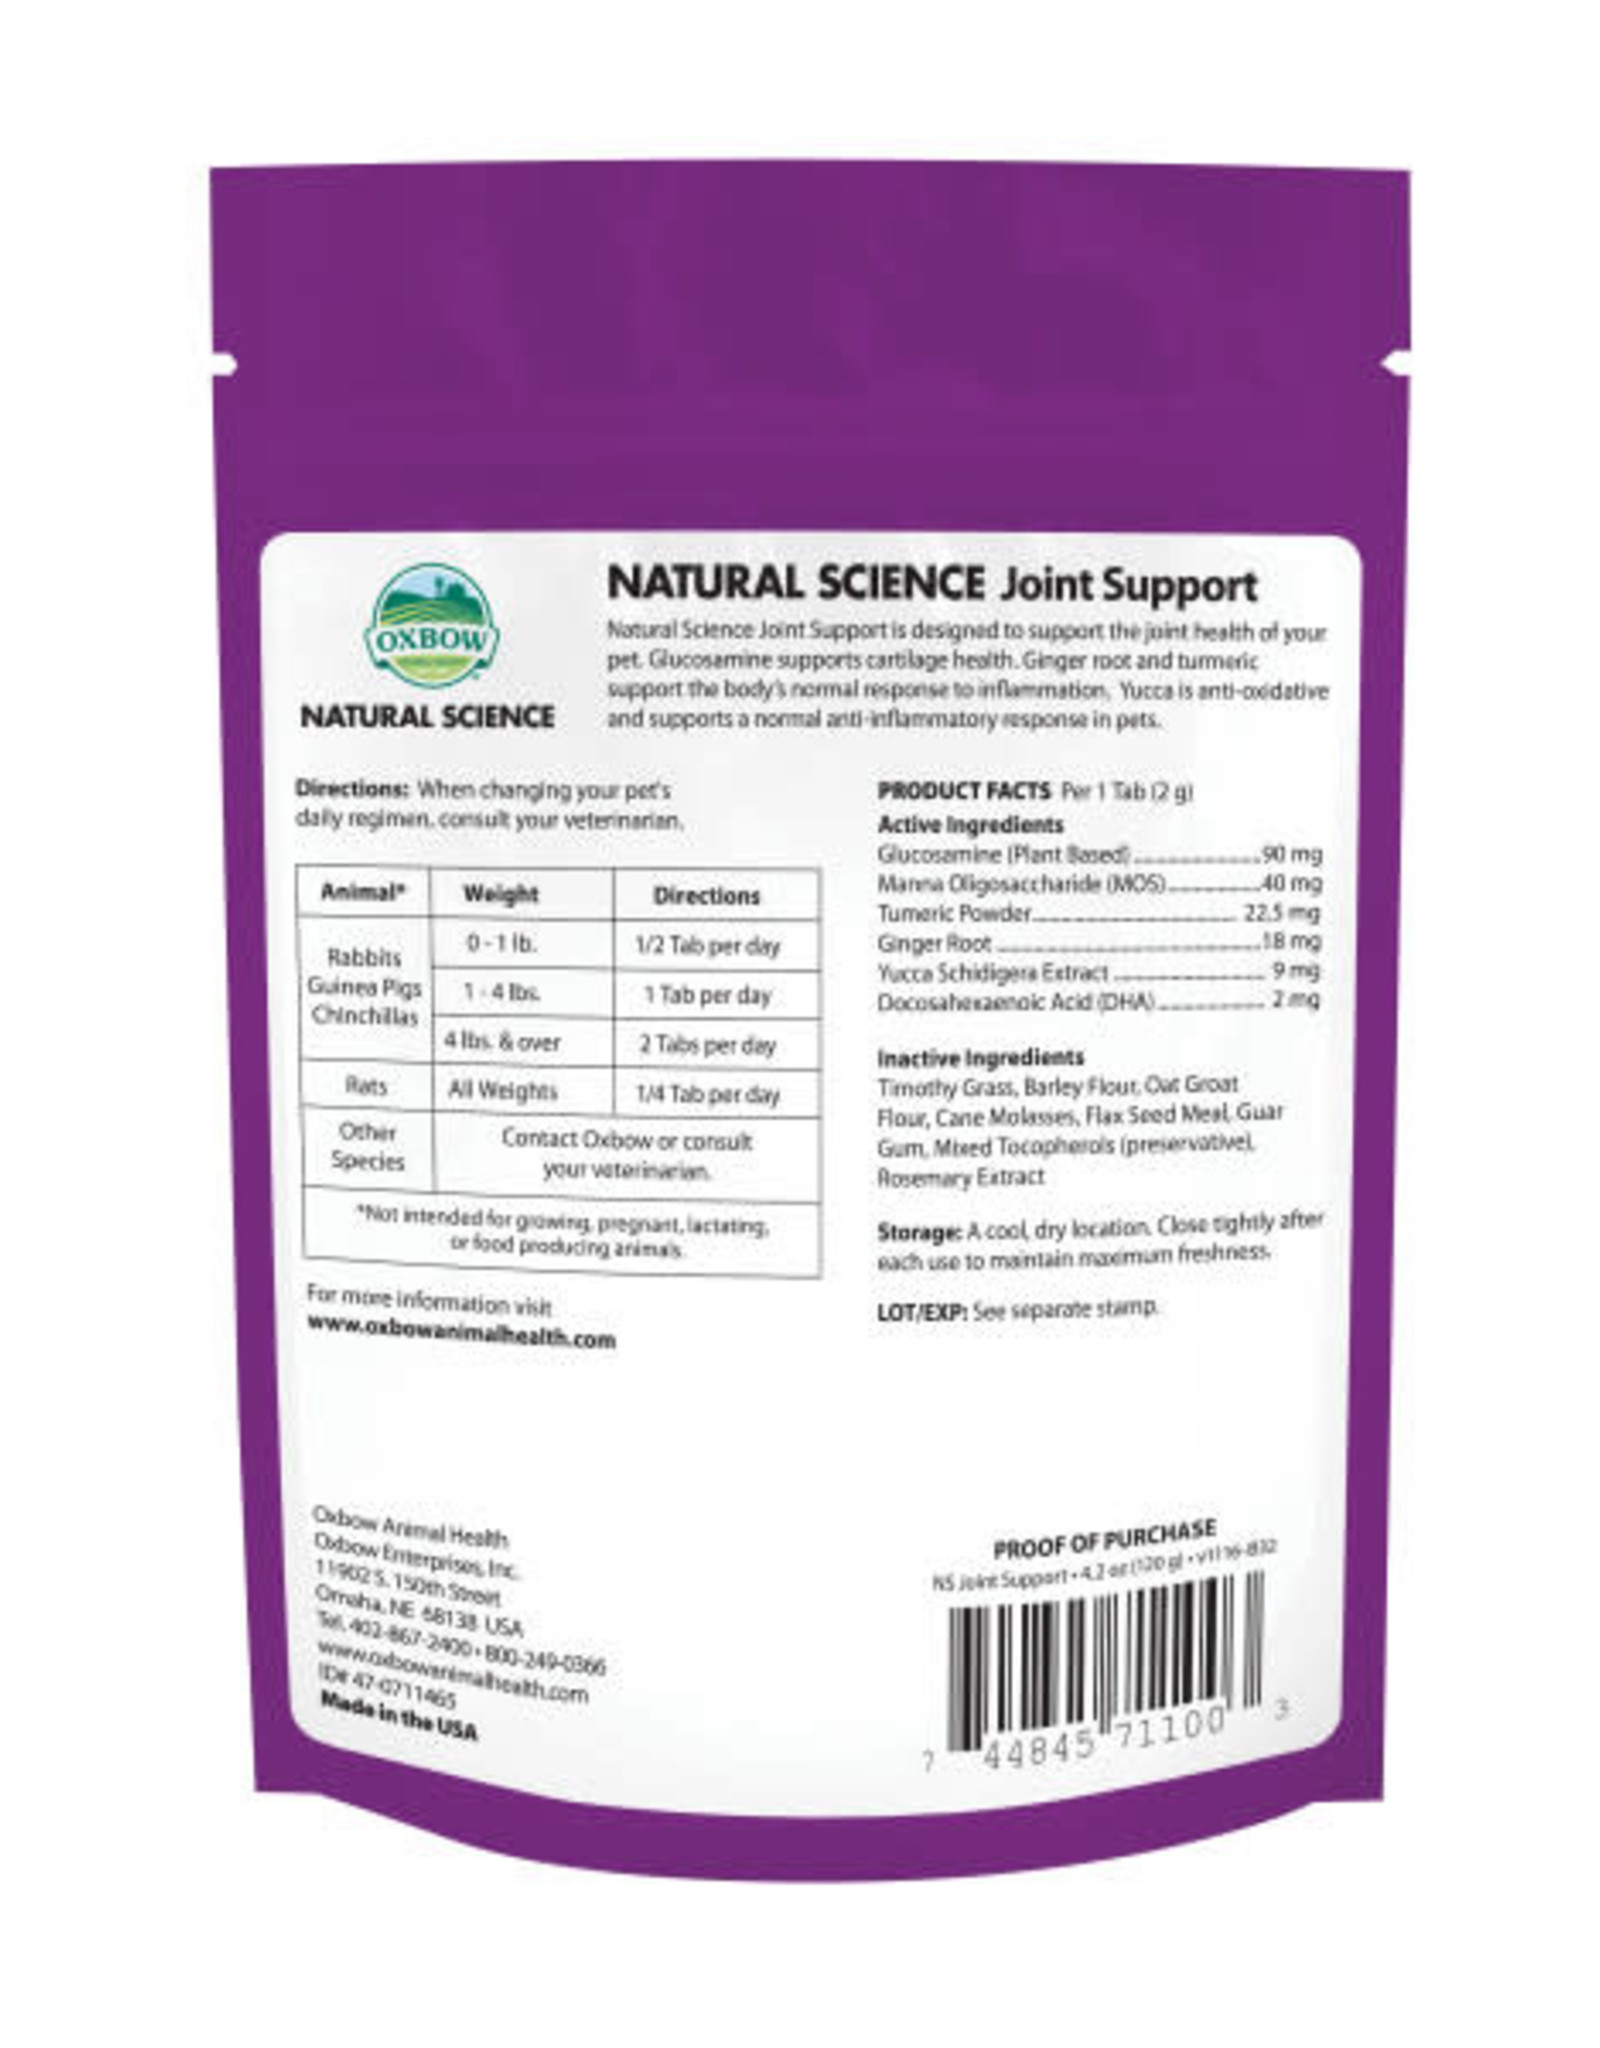 OXBOW OXBOW SMALL ANIMAL NATURAL SCIENCE JOINT 4.2OZ